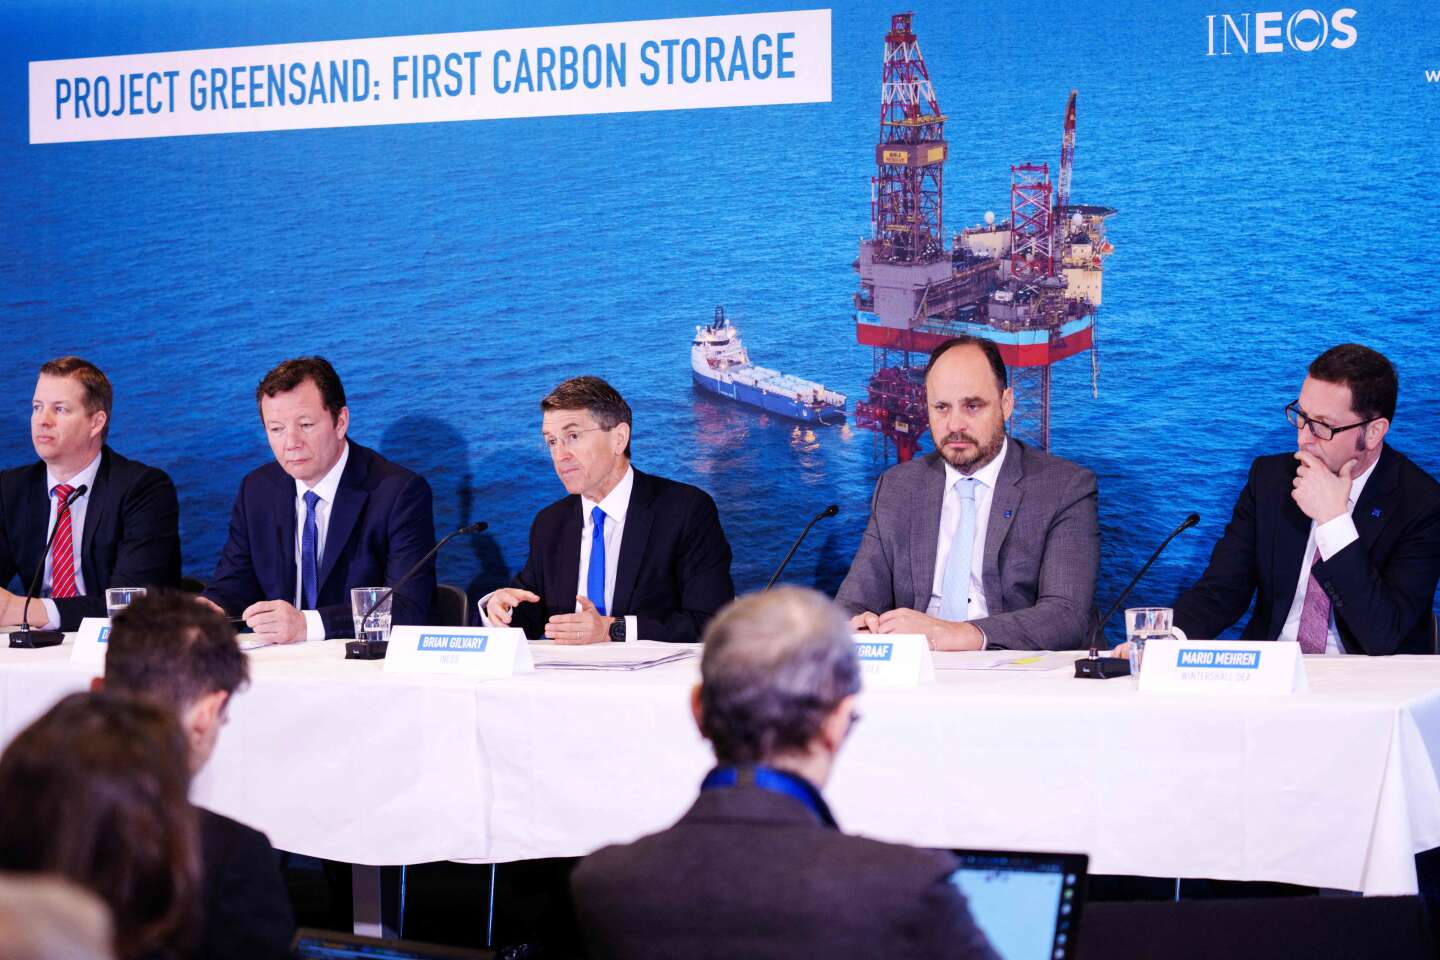 Denmark relies on CO2 storage to reduce its emissions